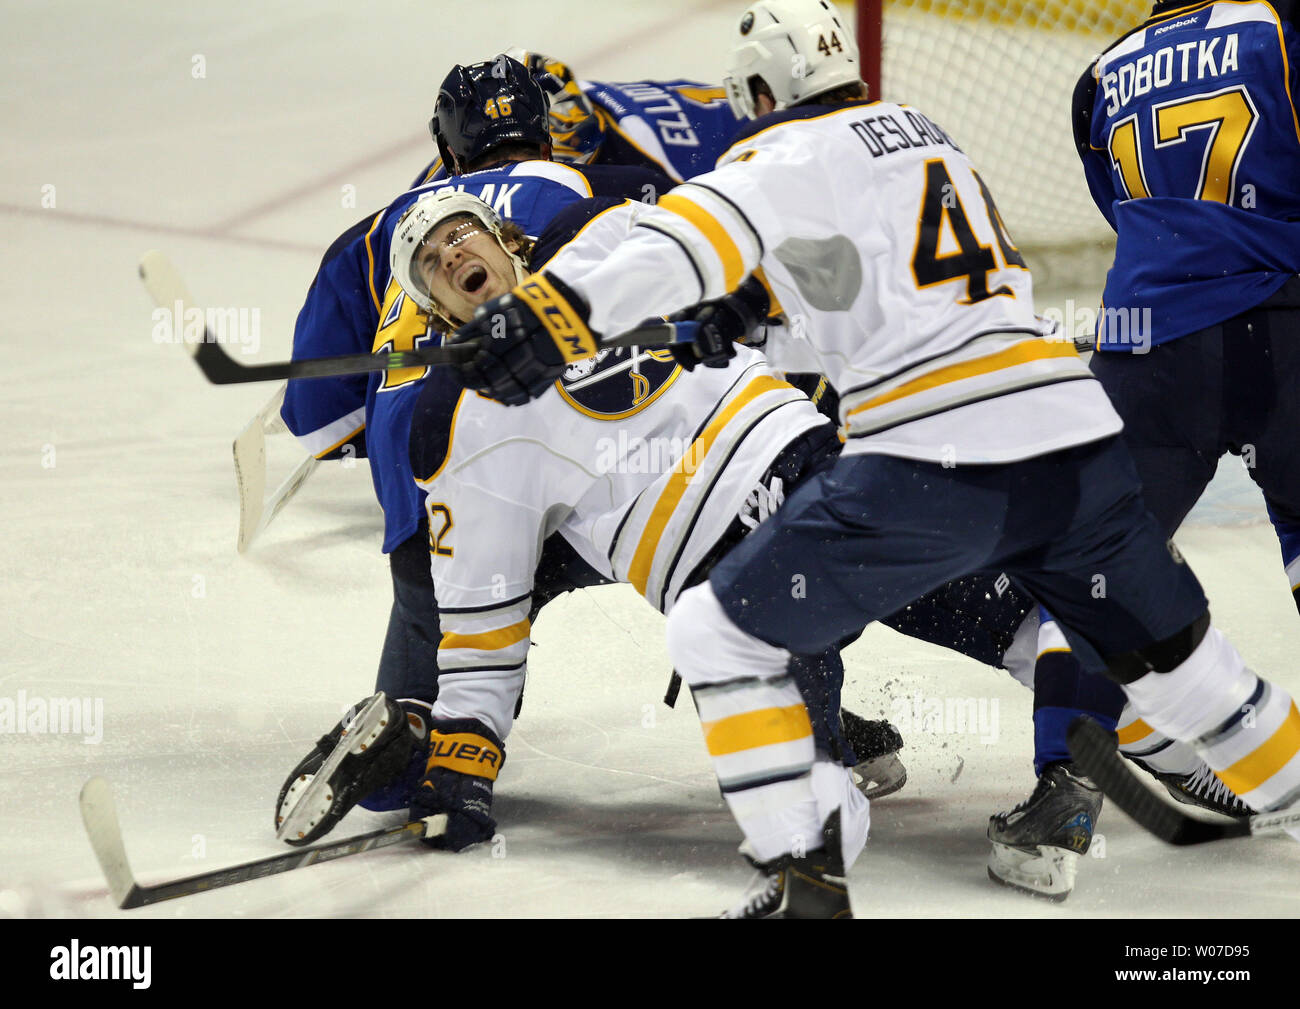 Buffalo Sabres Marcus Foligno yells out in pain after getting his leg bent back in a collission with St. Louis Blues Roman Polak of the Czech Republic in the first period at the Scottrade Center in St. Louis on April 3, 2014. UPI/Bill Greenblatt Stock Photo